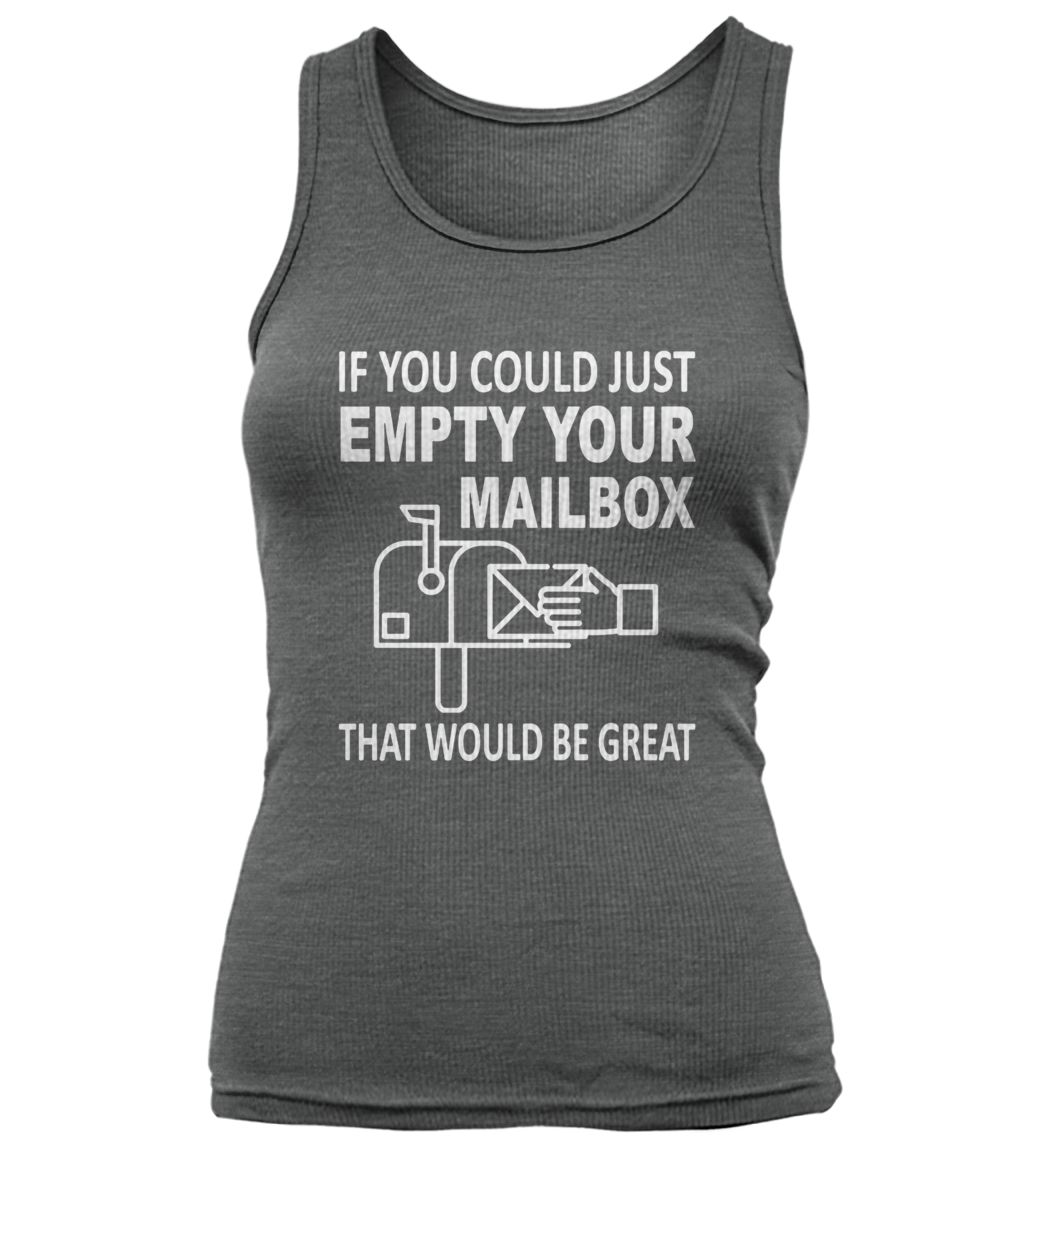 If you could just empty your mailbox that would be great women's tank top